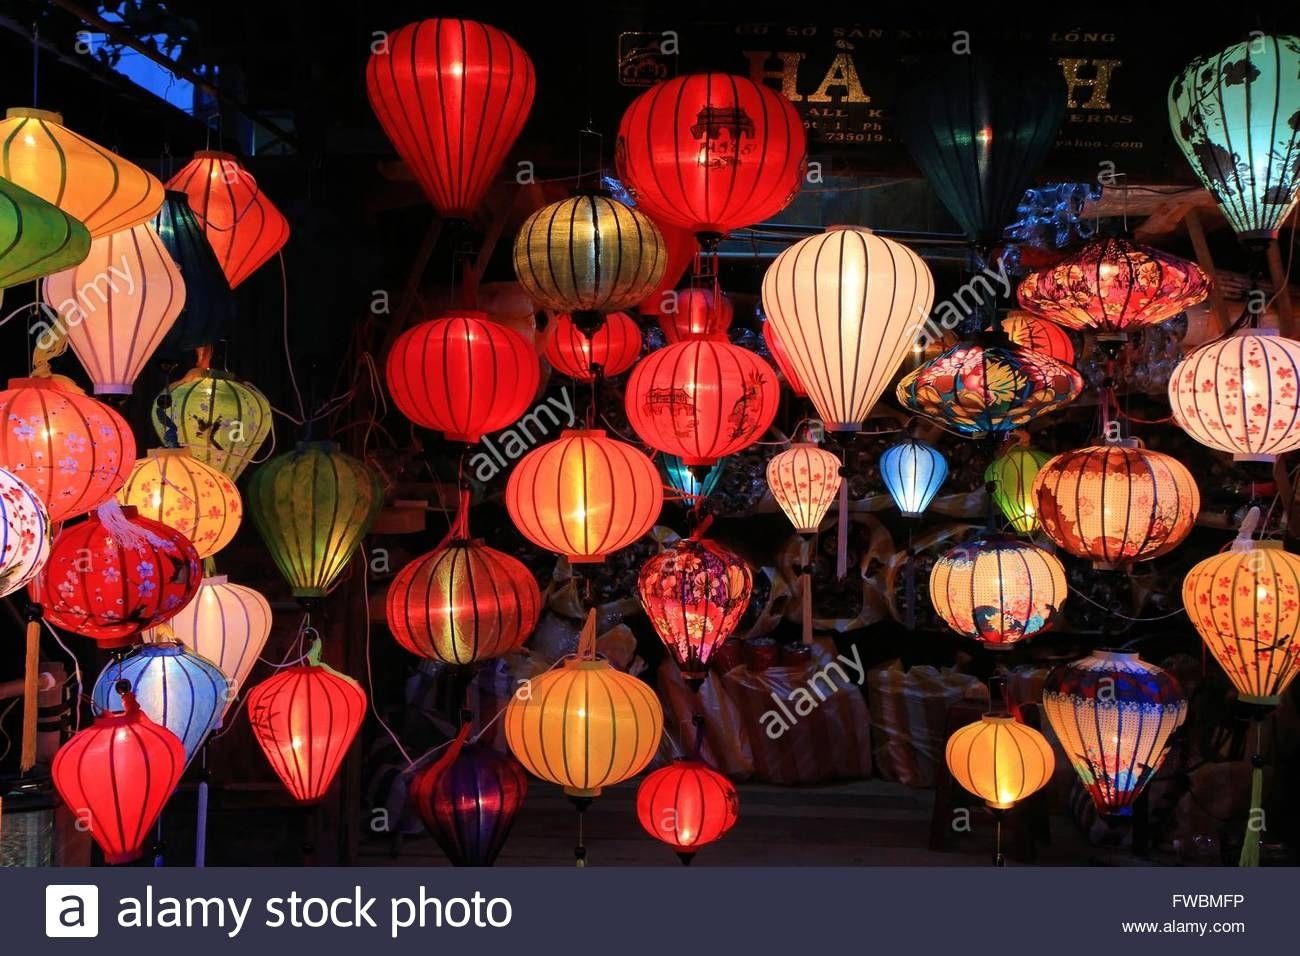 Traditional Silk And Bamboo Lanterns For Sale In Hoi An, Vietnam Regarding Outdoor Vietnamese Lanterns (View 13 of 20)